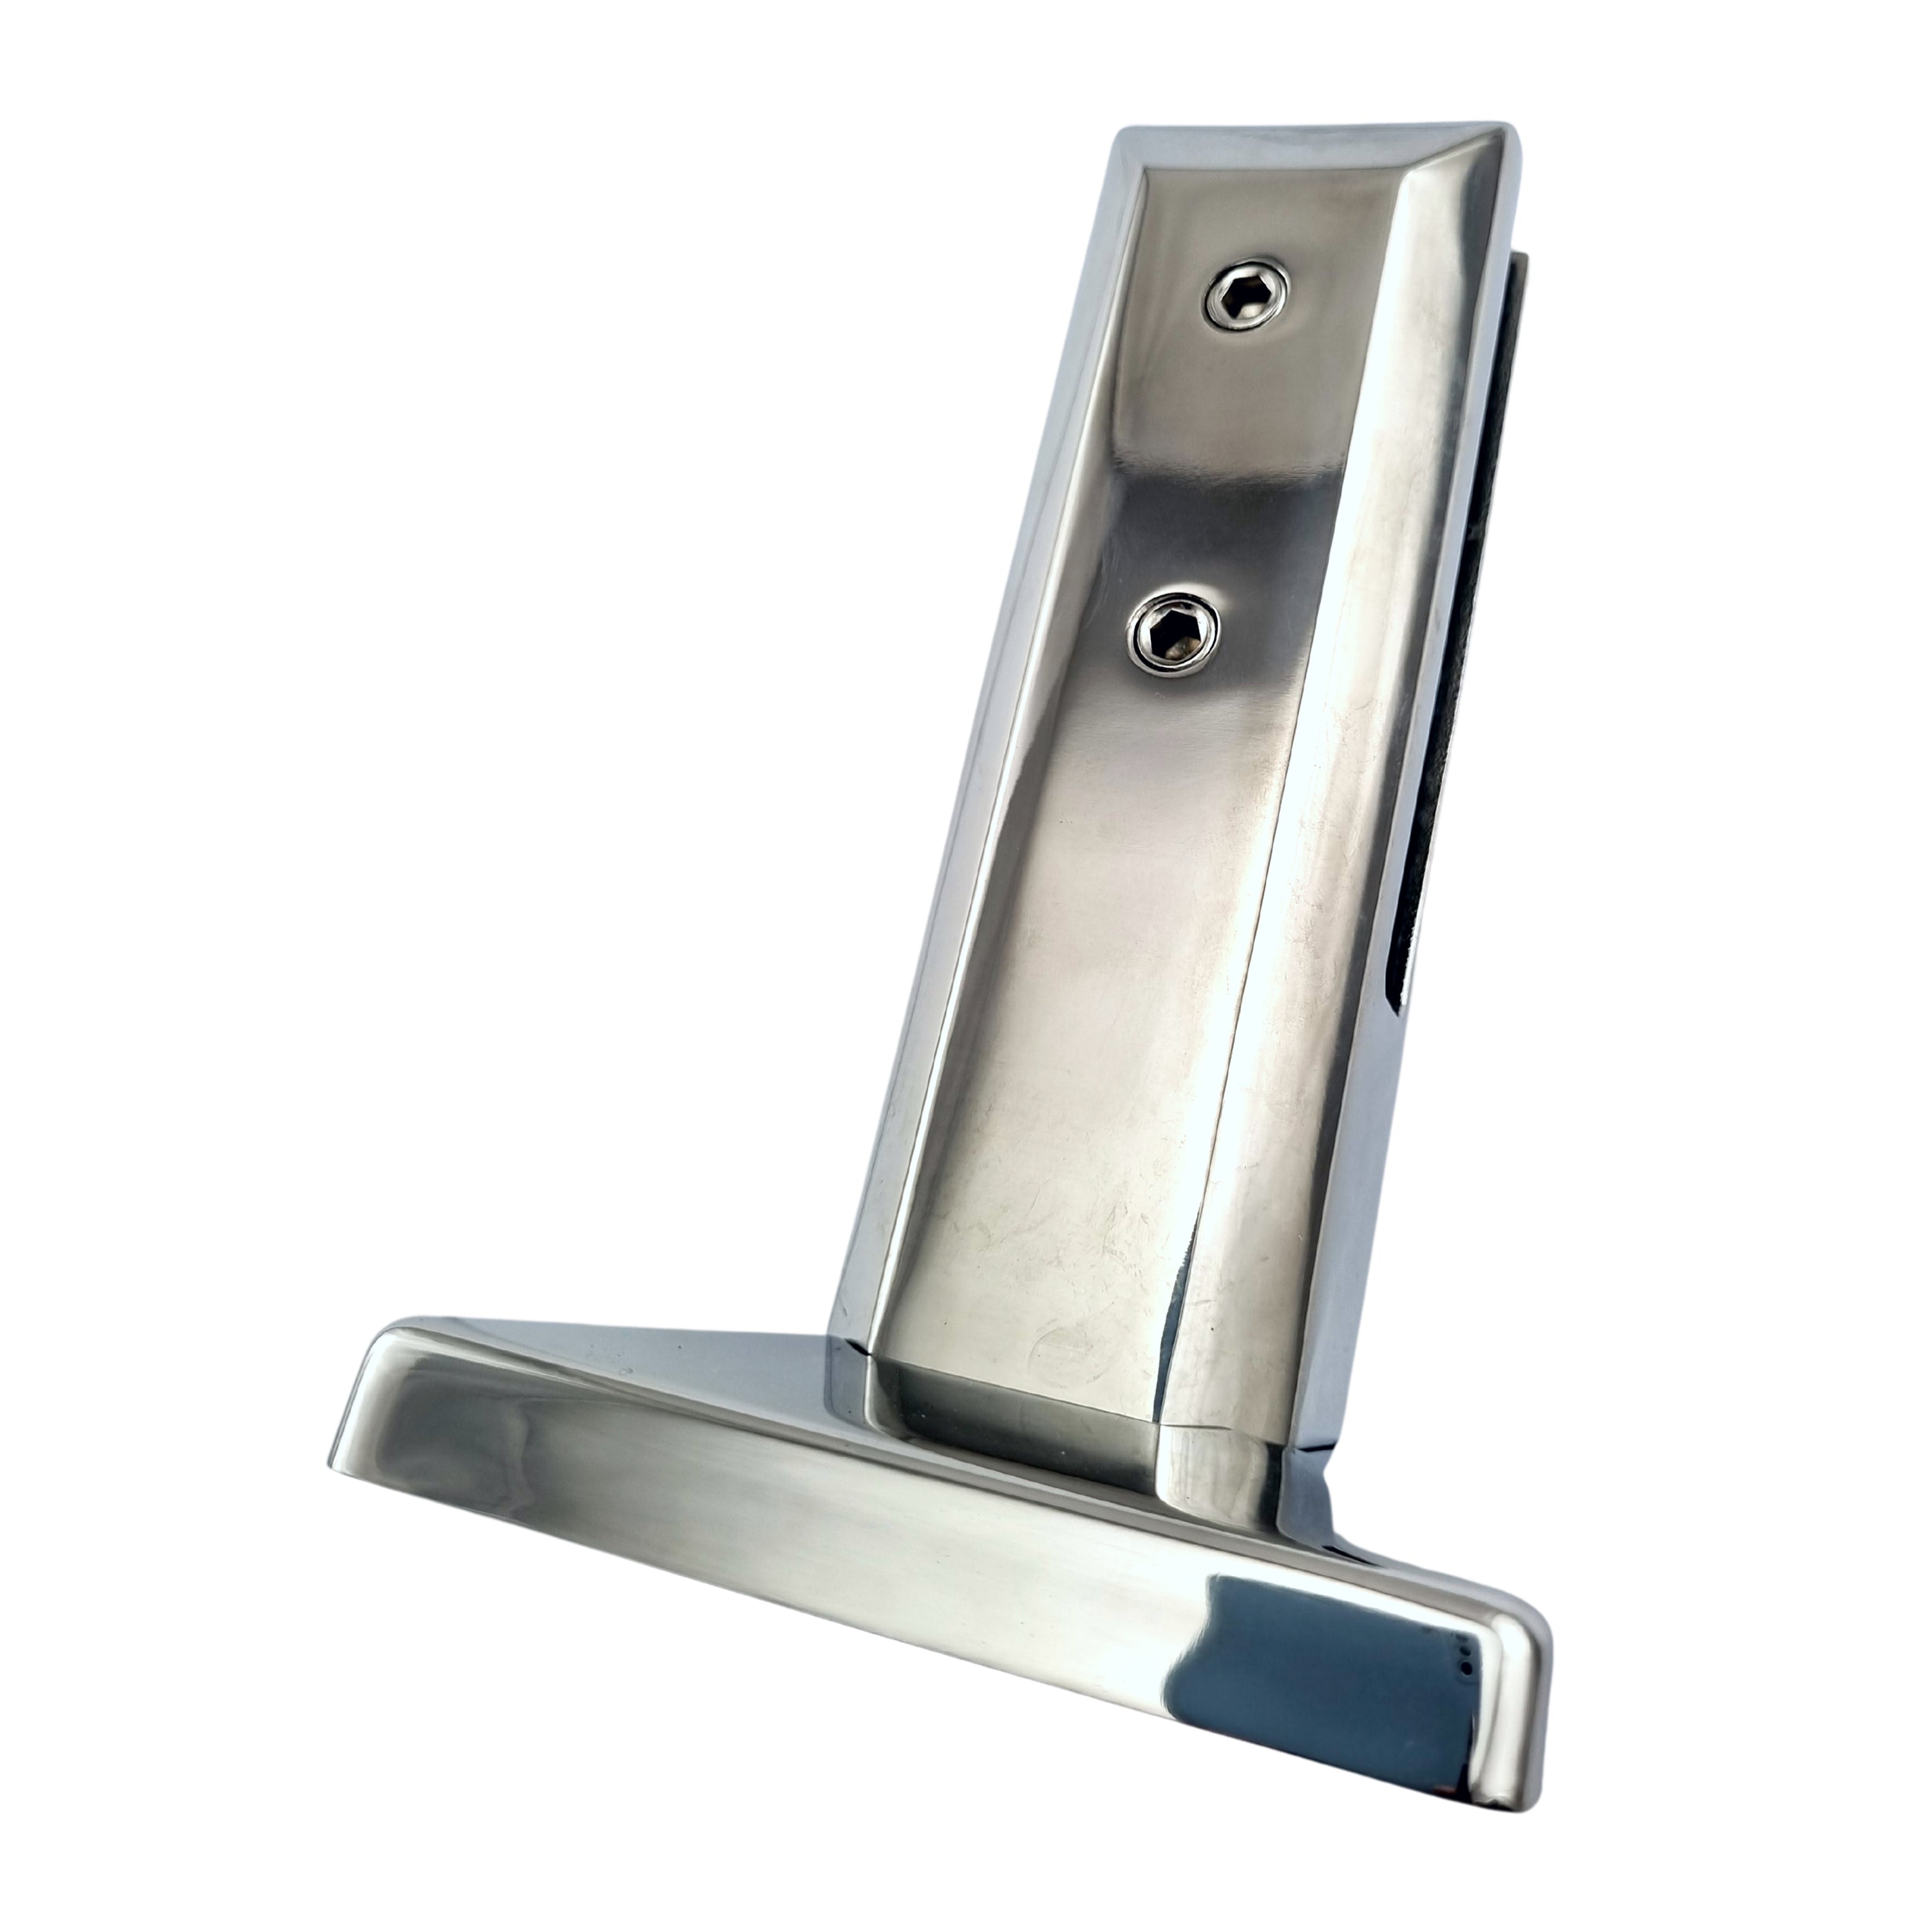 Mirror Finish Stainless Steel Premium Square Spigot. Suits 10mm thick glass. For glass balustrading or glass pool fencing. Australia wide shipping. Shop: chain.com.au